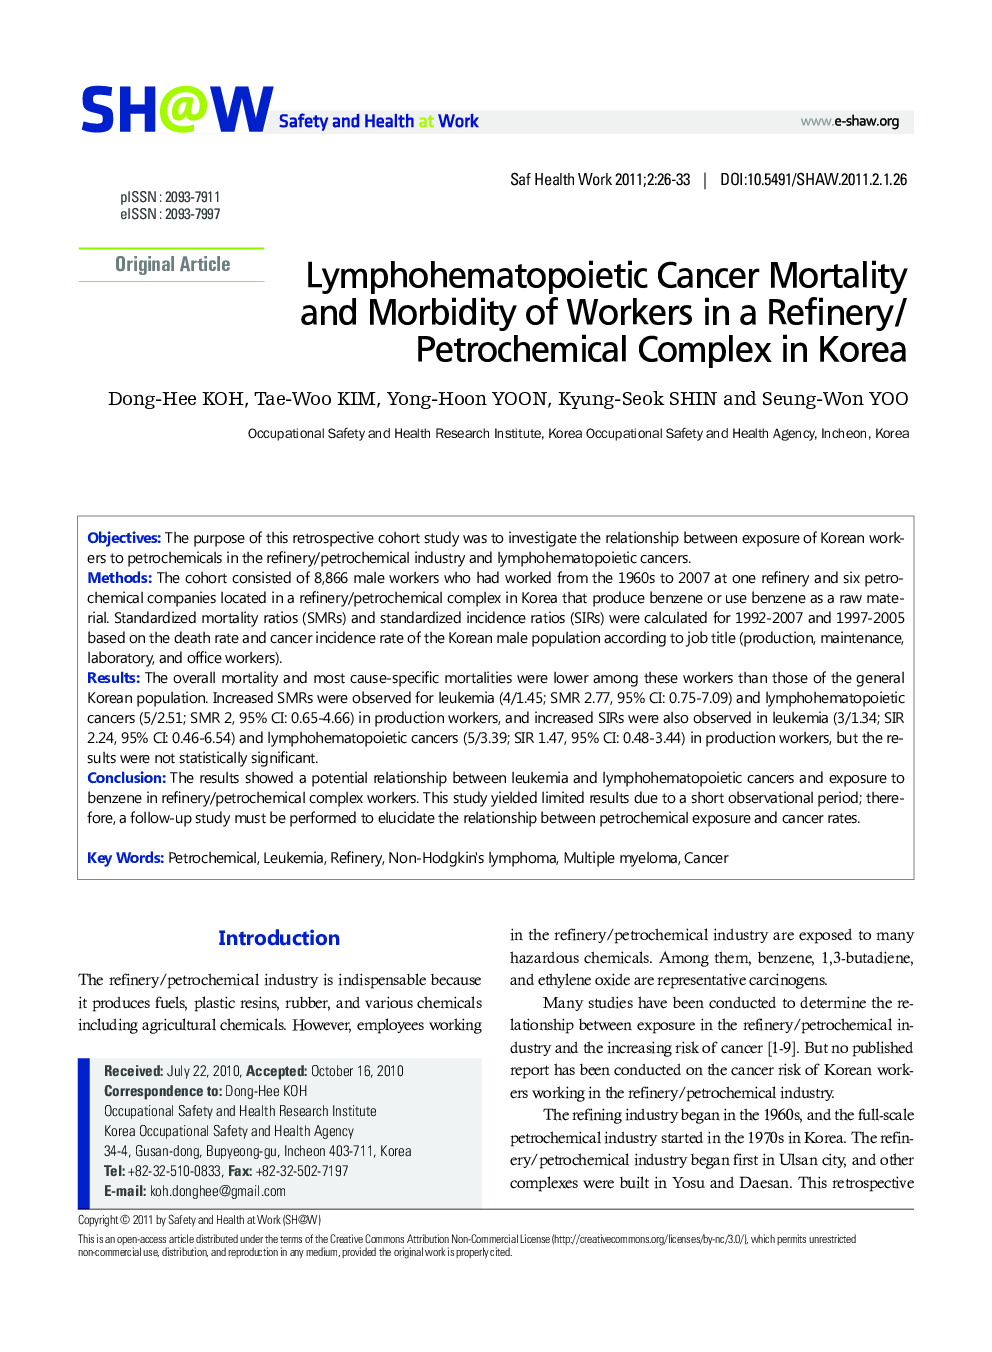 Lymphohematopoietic Cancer Mortality and Morbidity of Workers in a Refinery/Petrochemical Complex in Korea